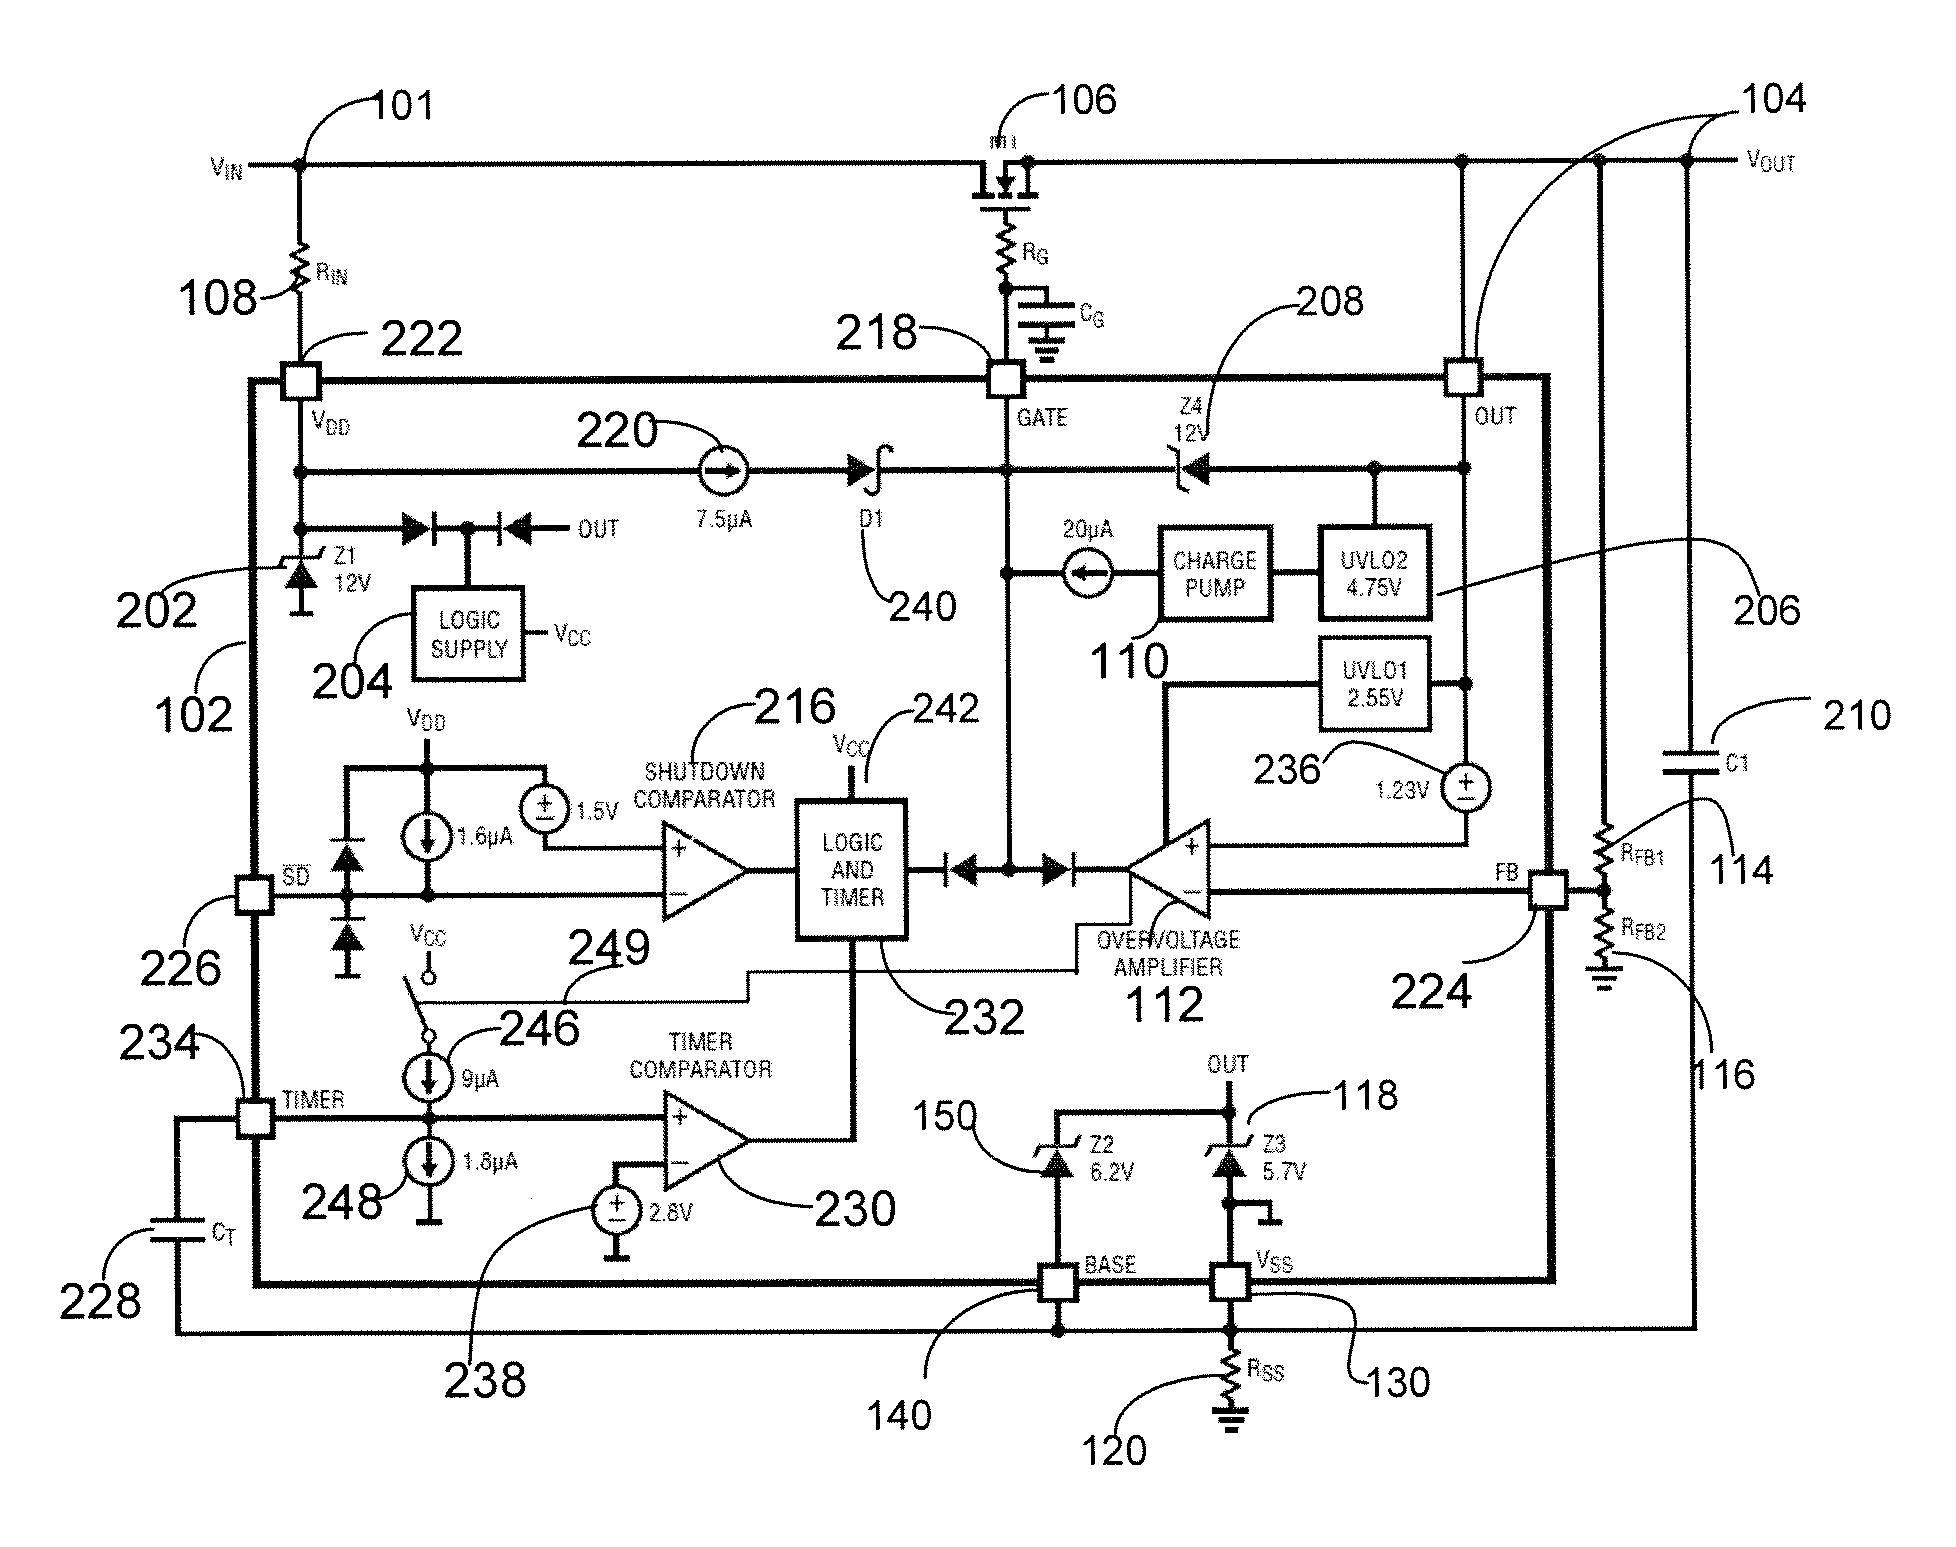 Circuitry to prevent overvoltage of circuit systems